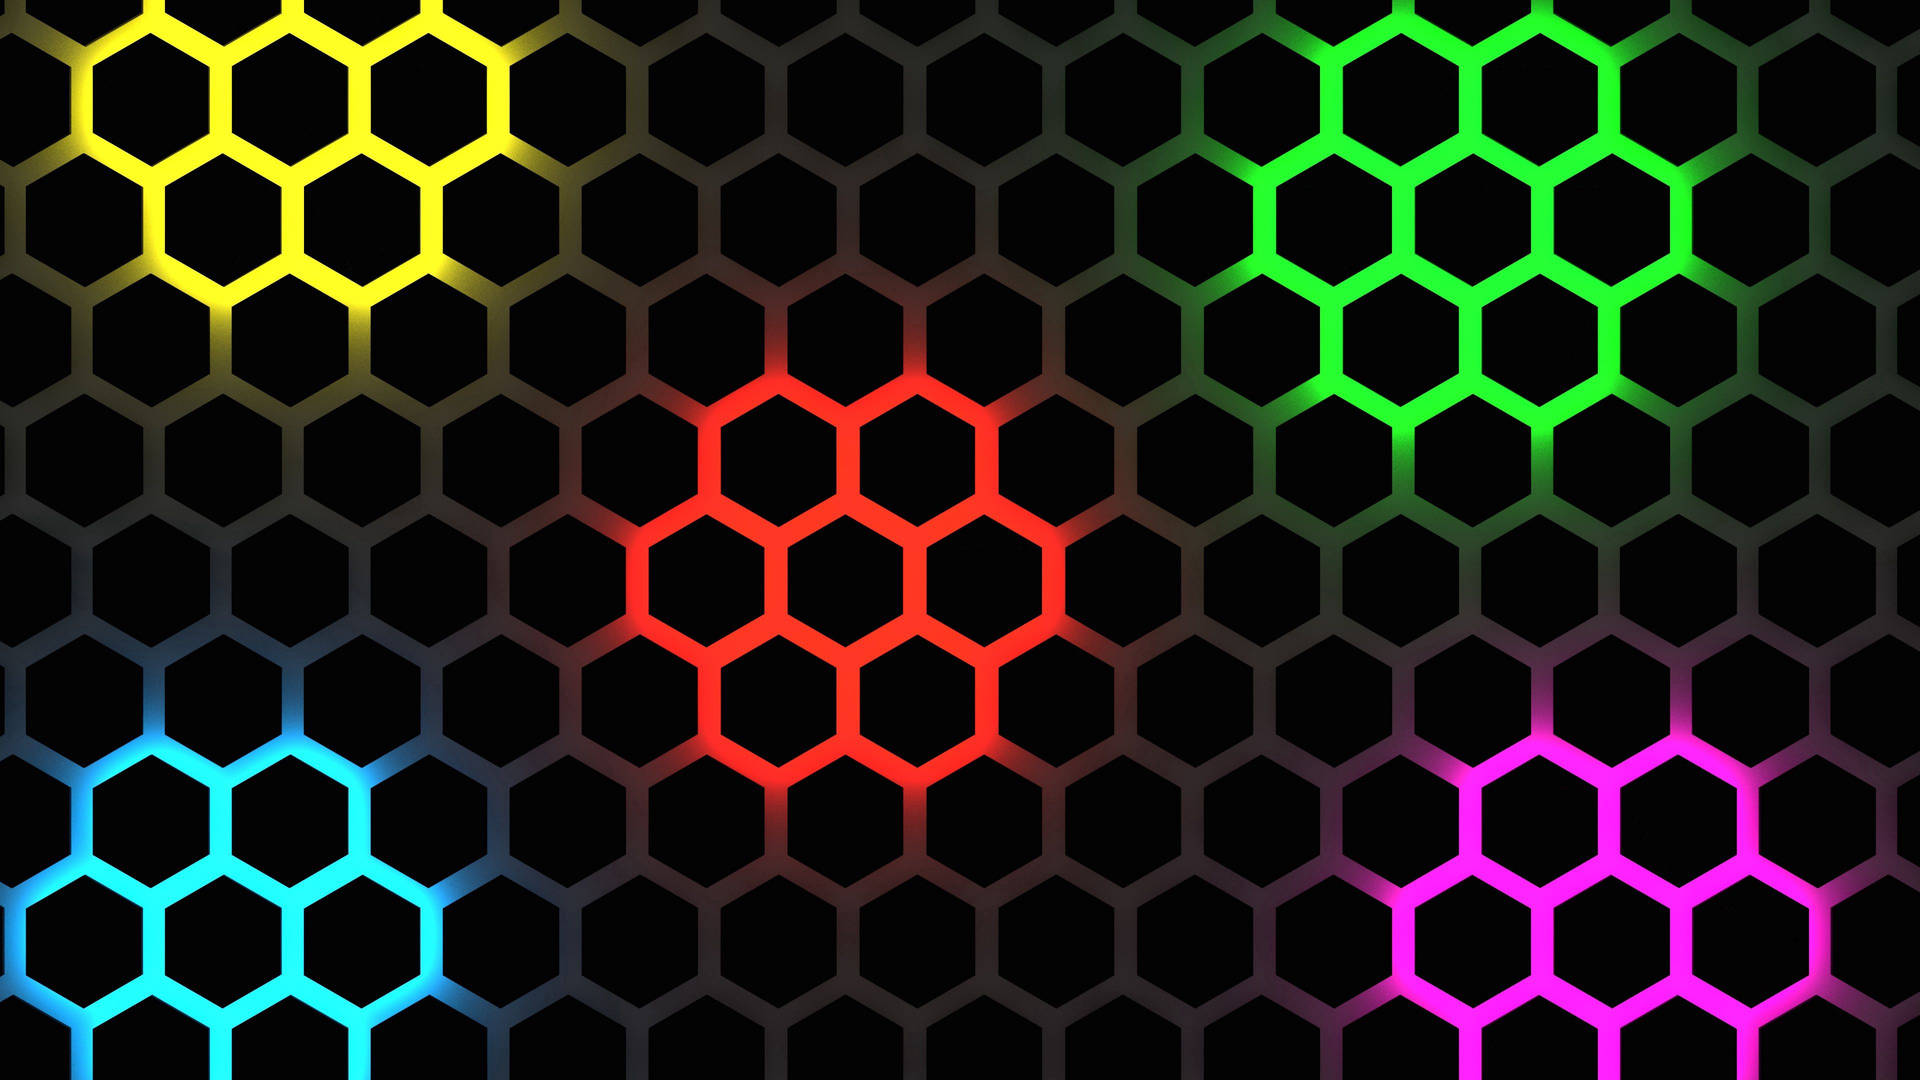 Hexagon 3840X2160 Wallpaper and Background Image